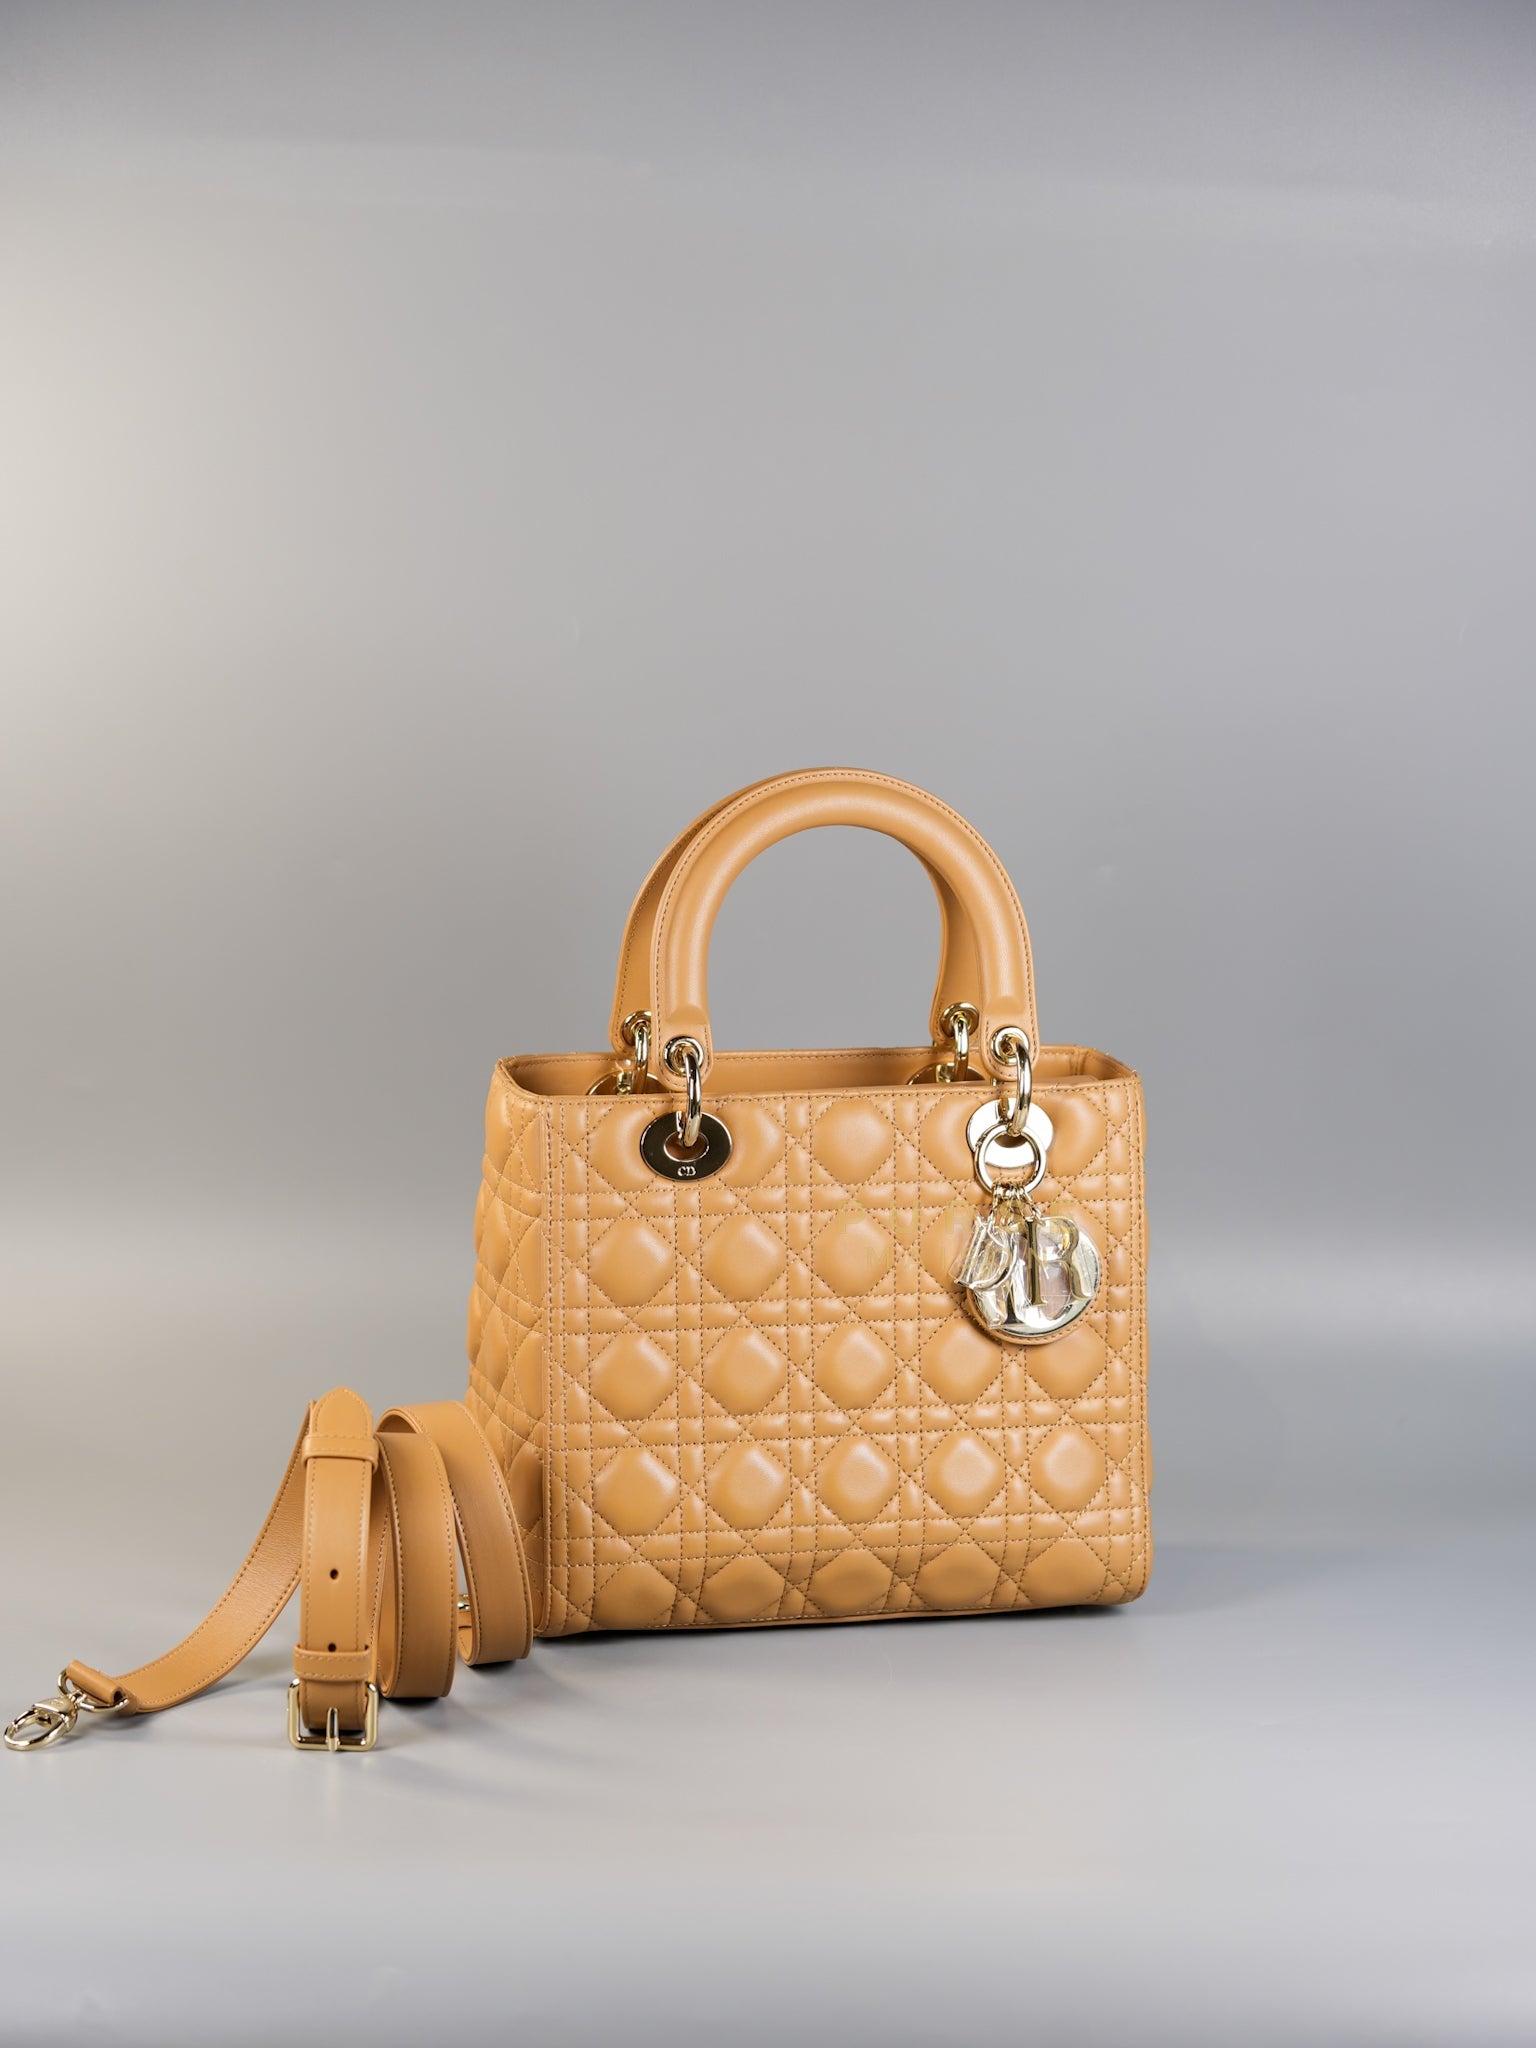 Lady Dior Medium in Biscuit Lambskin Leather & Light Gold Hardware | Purse Maison Luxury Bags Shop